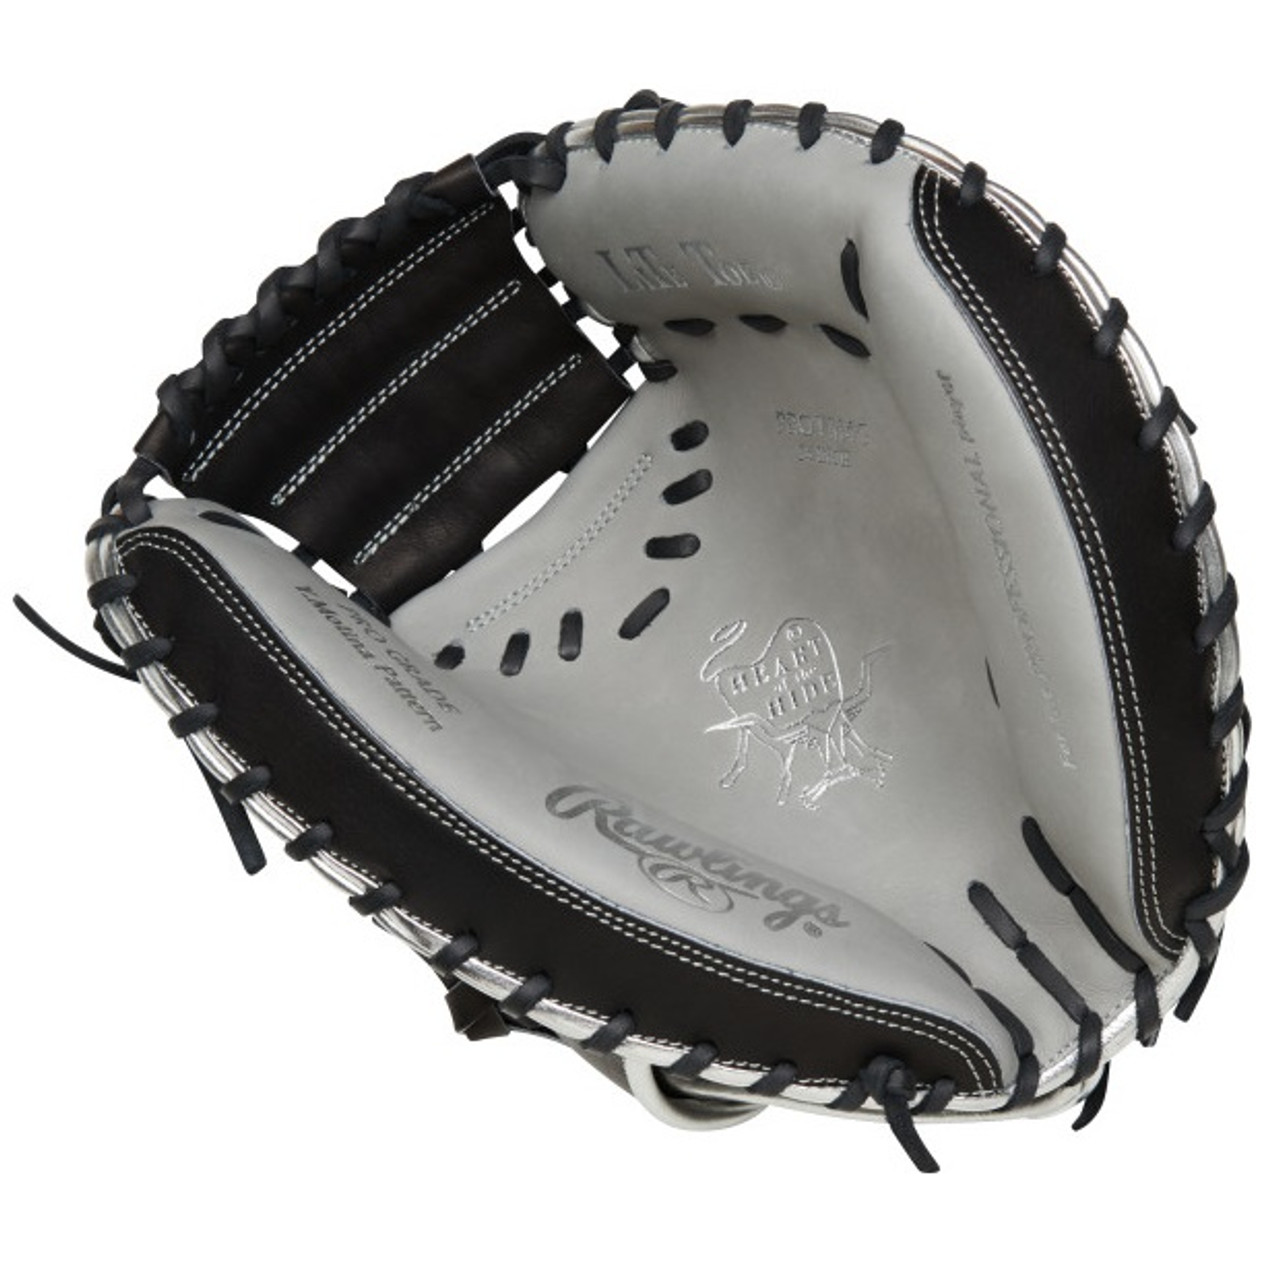 https://cdn11.bigcommerce.com/s-2hhnbofc/images/stencil/1280x1280/products/5452/23439/rawlings-color-sync-grey-ym4-1__47741.1677682360.jpg?c=2